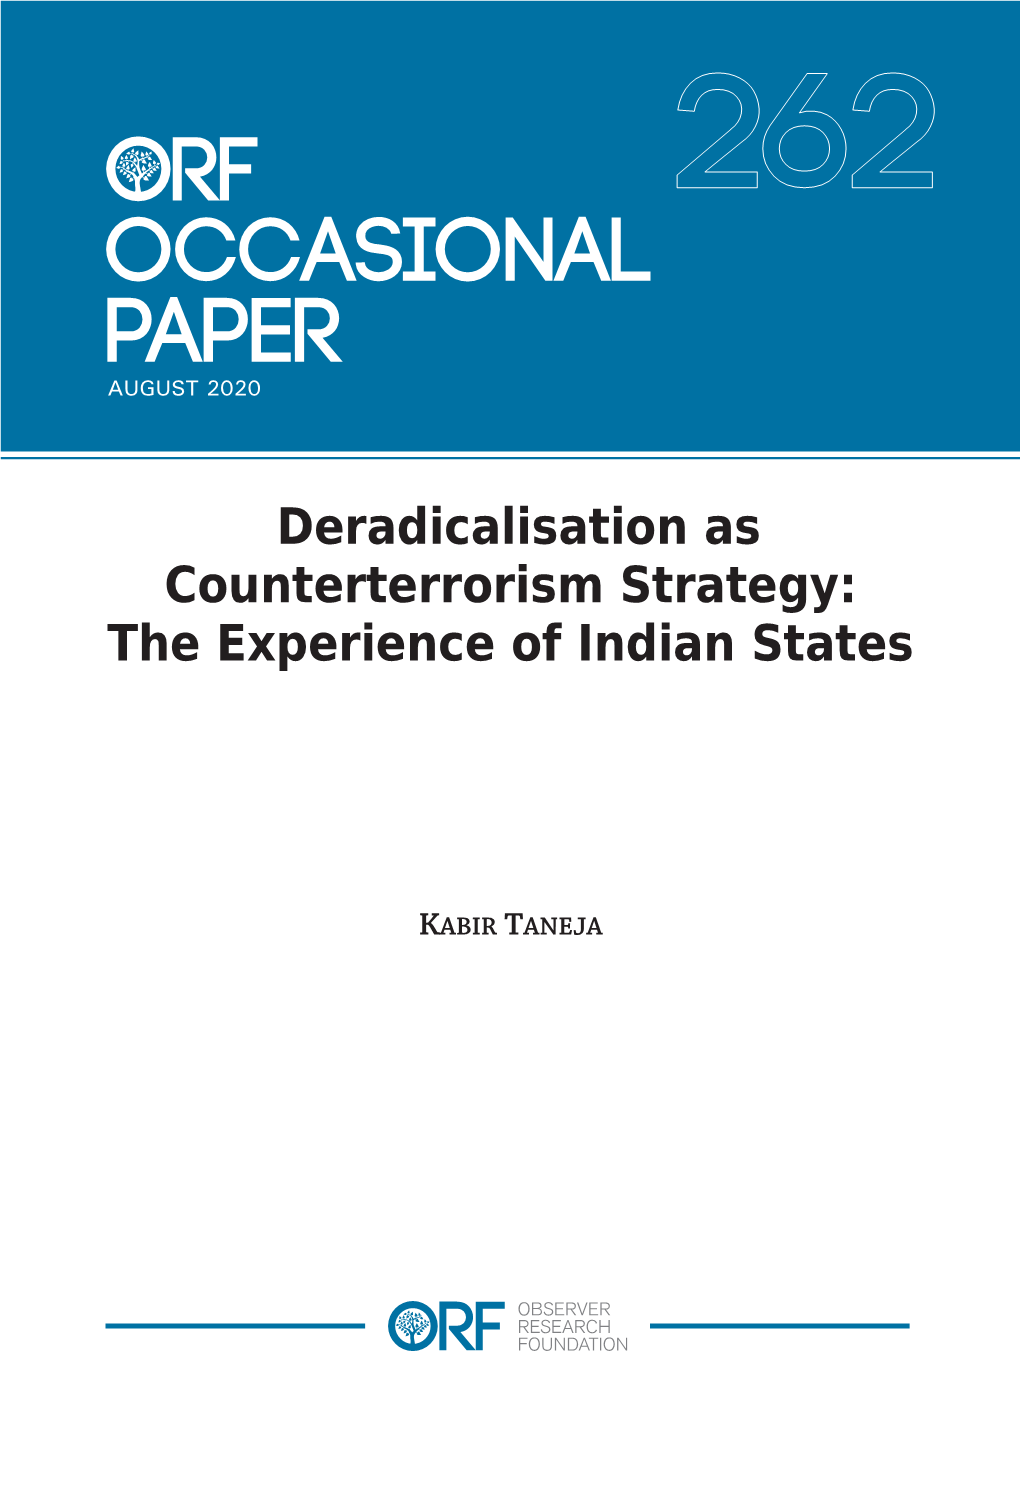 Deradicalisation As Counterterrorism Strategy: the Experience of Indian States